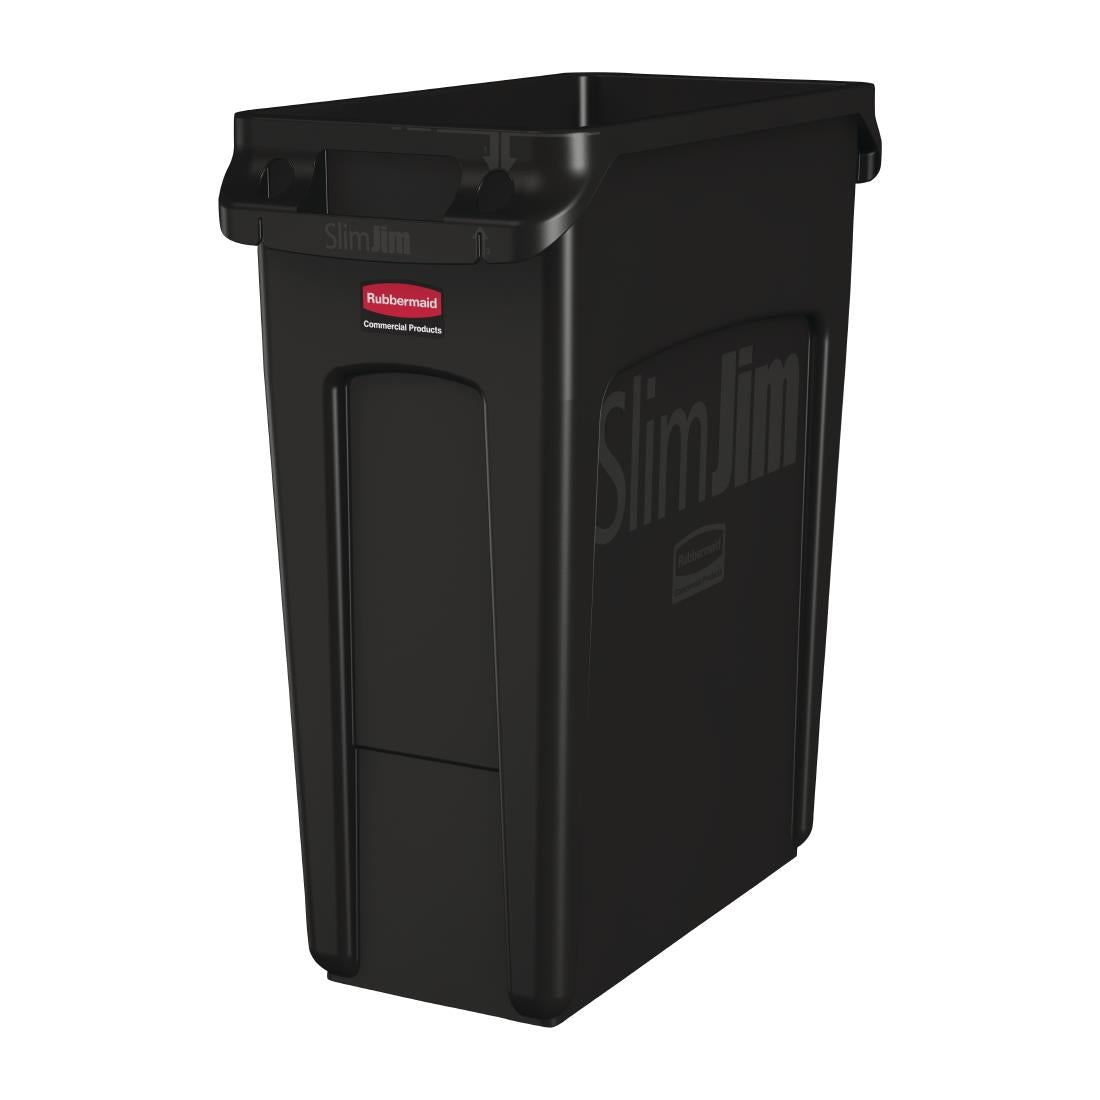 CP652 Rubbermaid Slim Jim Container With Venting Channels Black 60Ltr JD Catering Equipment Solutions Ltd